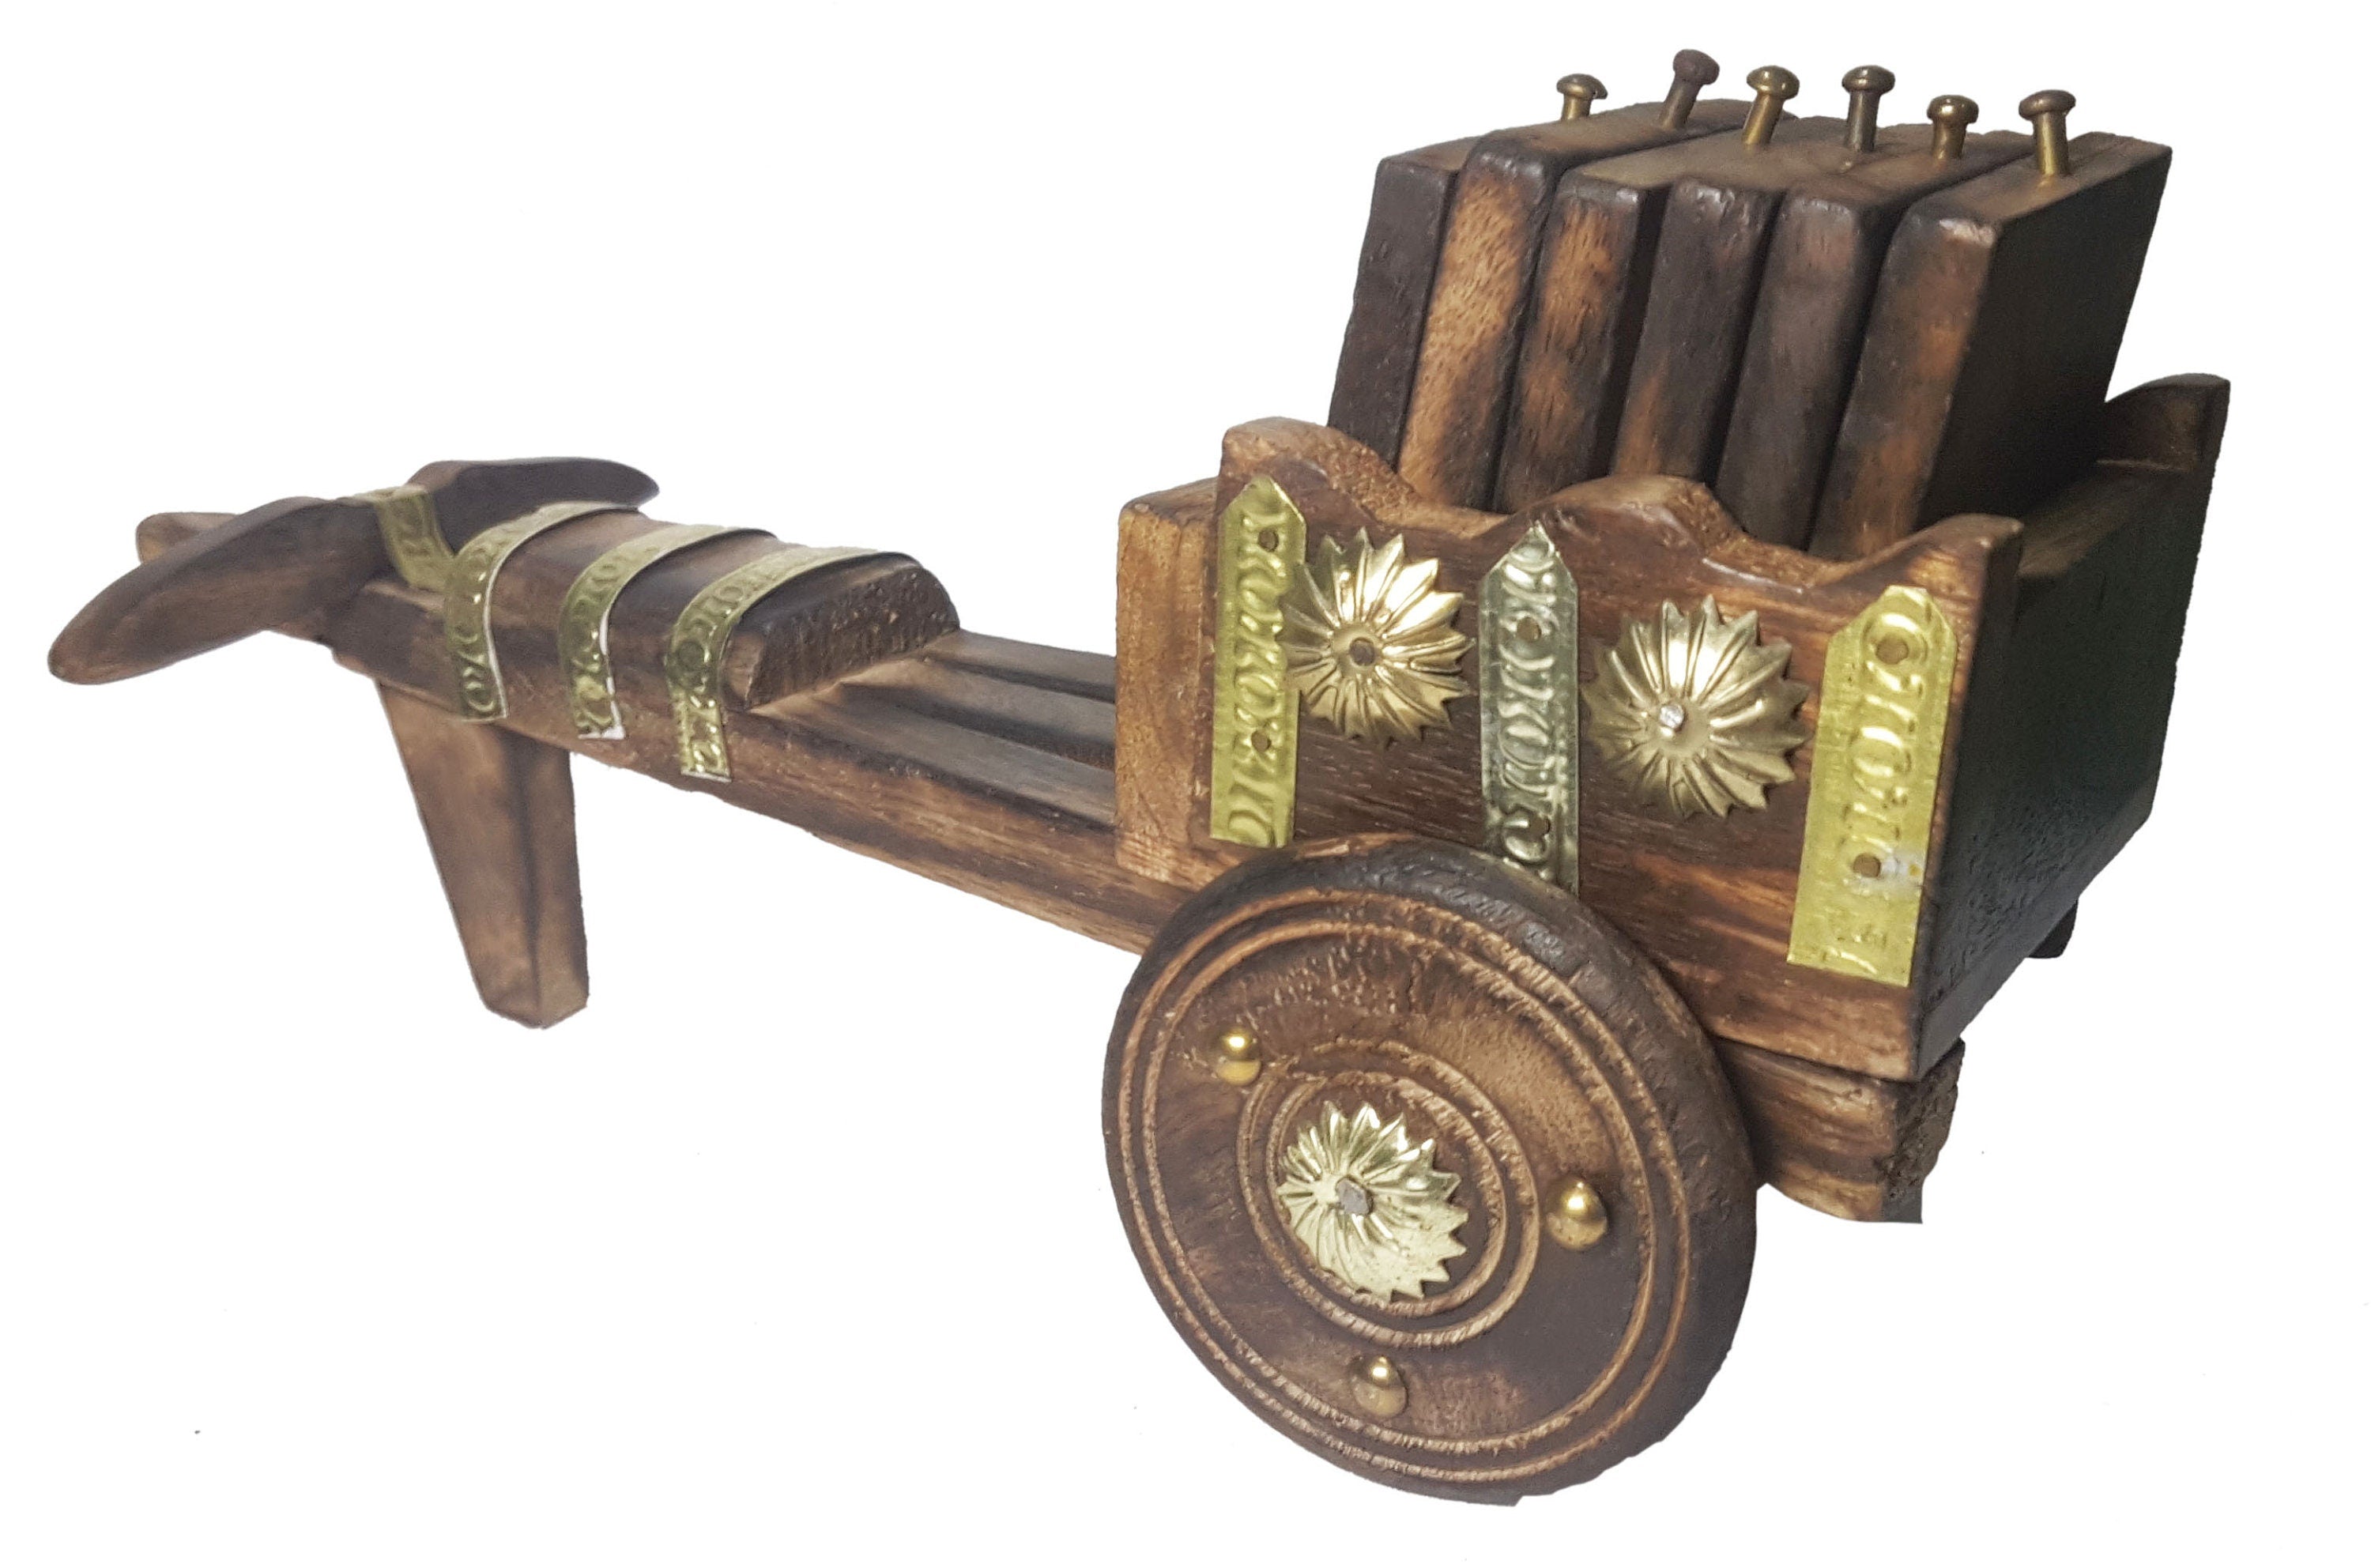 Wooden Handcrafted Mobile Bullok Cart Shaped Coasters (6 Pcs) with Gold color Metal Embedding